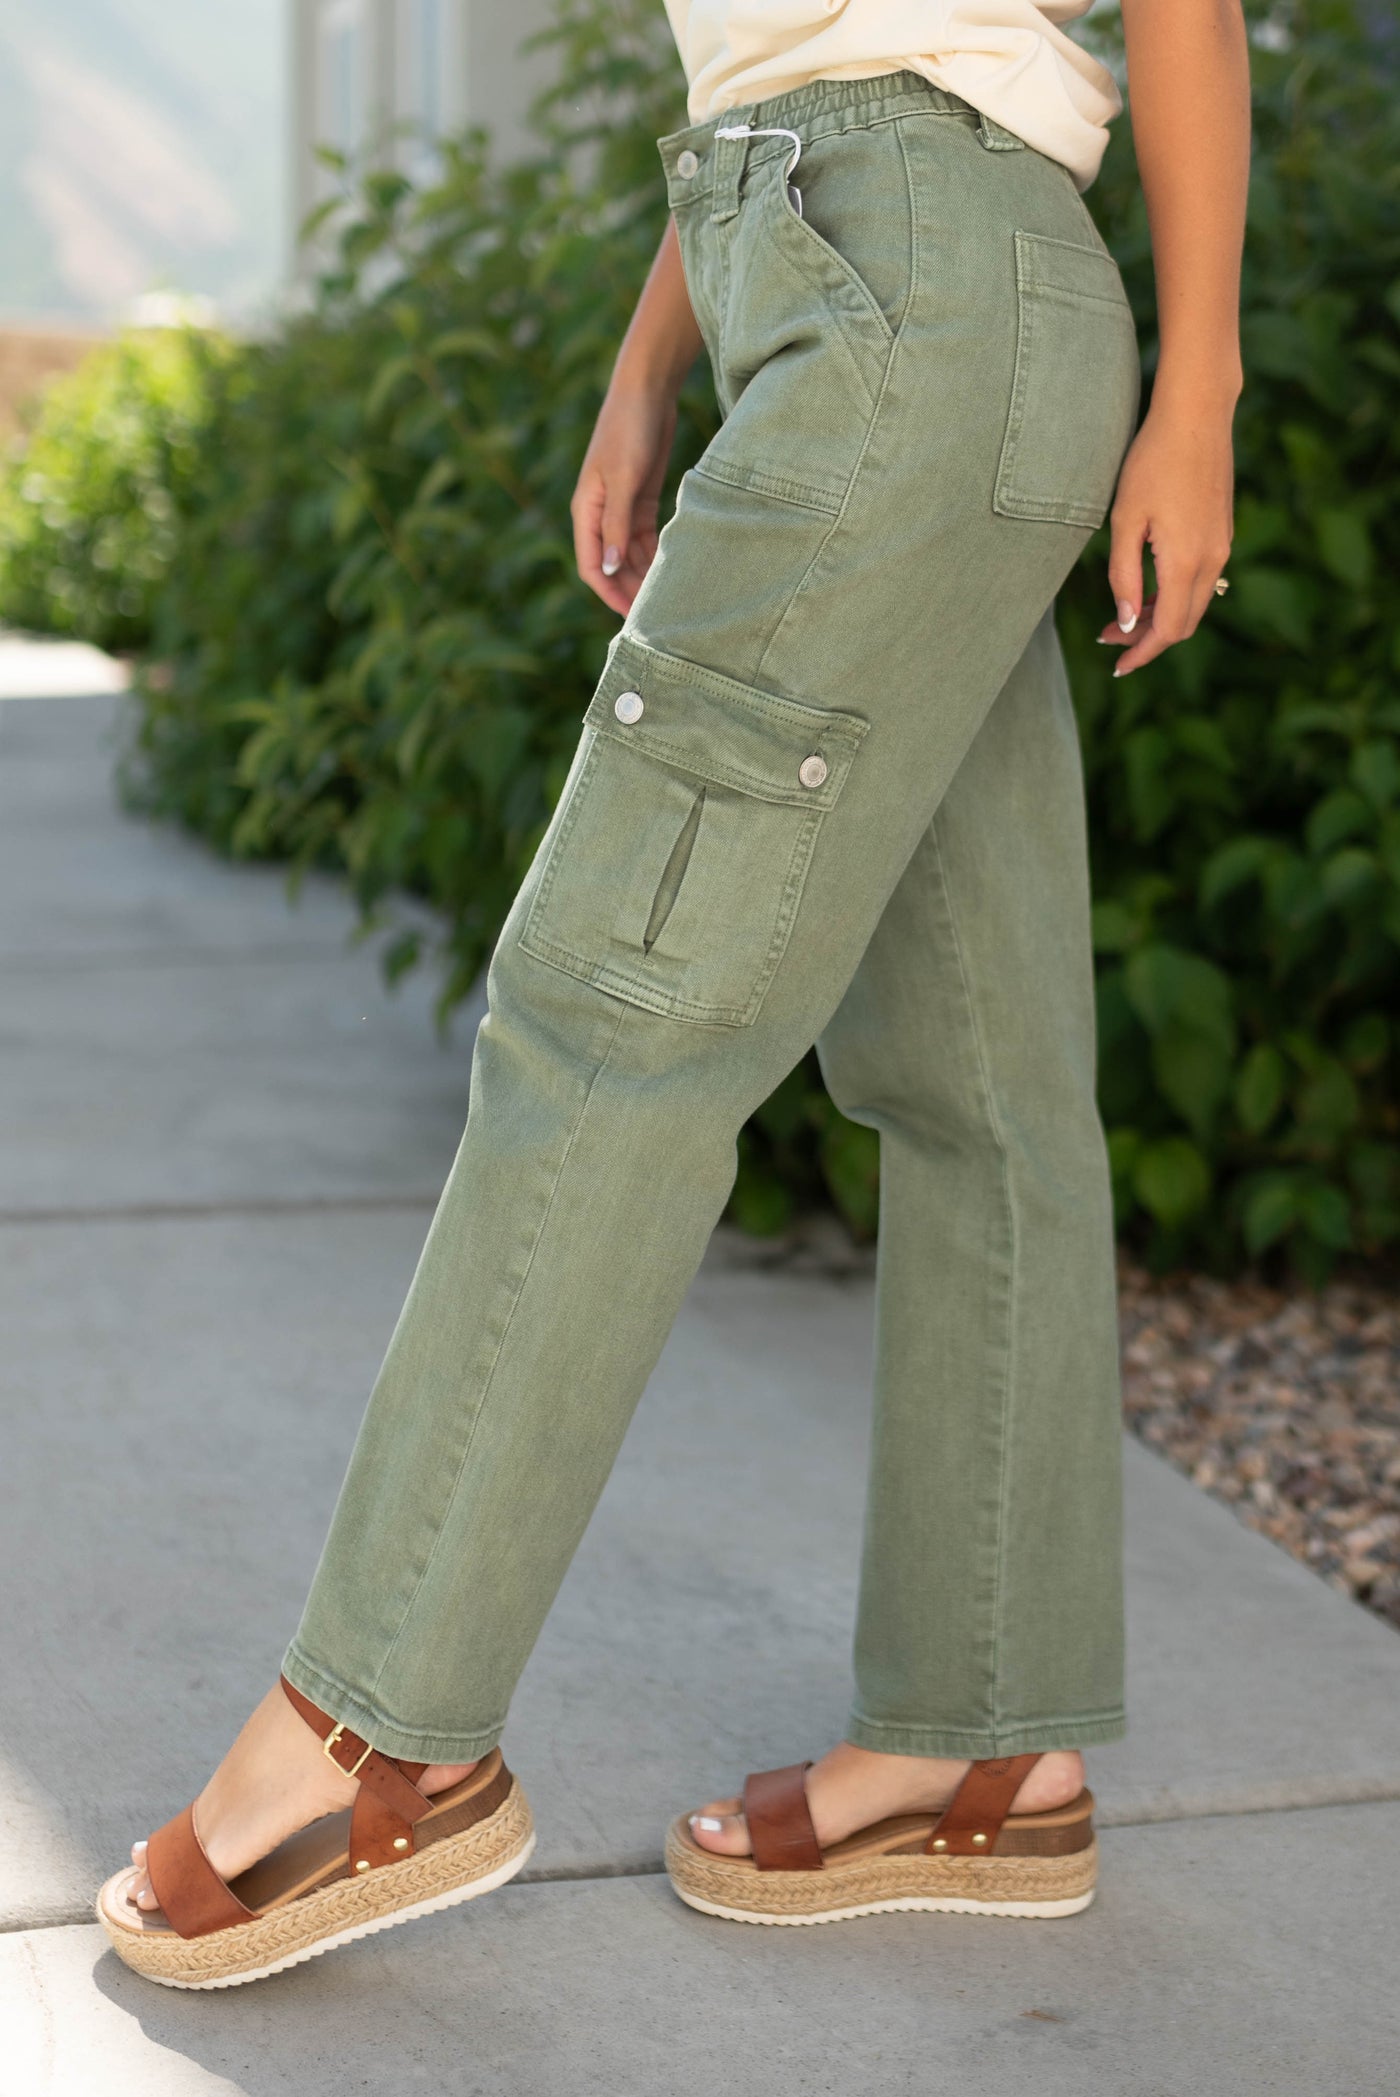 Side view of army green jeans